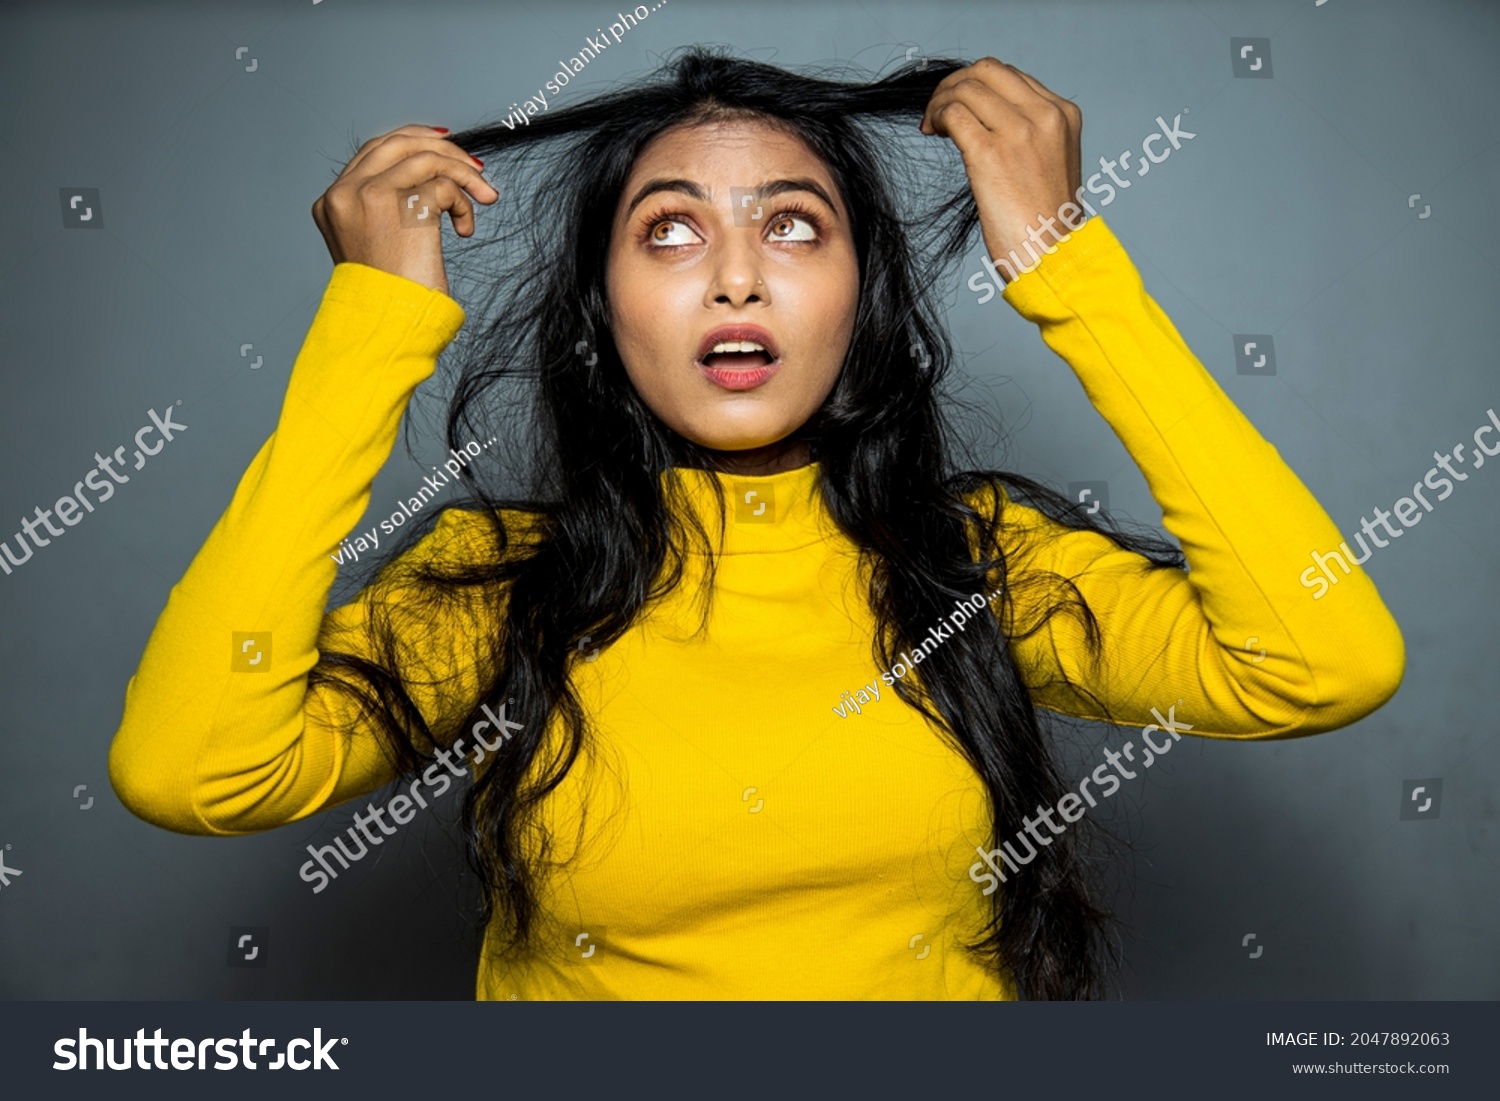 Beautiful Frustrated Indian Young Woman With Long Disheveled Hair.
Holding Messy Un-brushed Dry black Hair In Hands. Hair Damage, Health And Beauty Concept.
 #2047892063